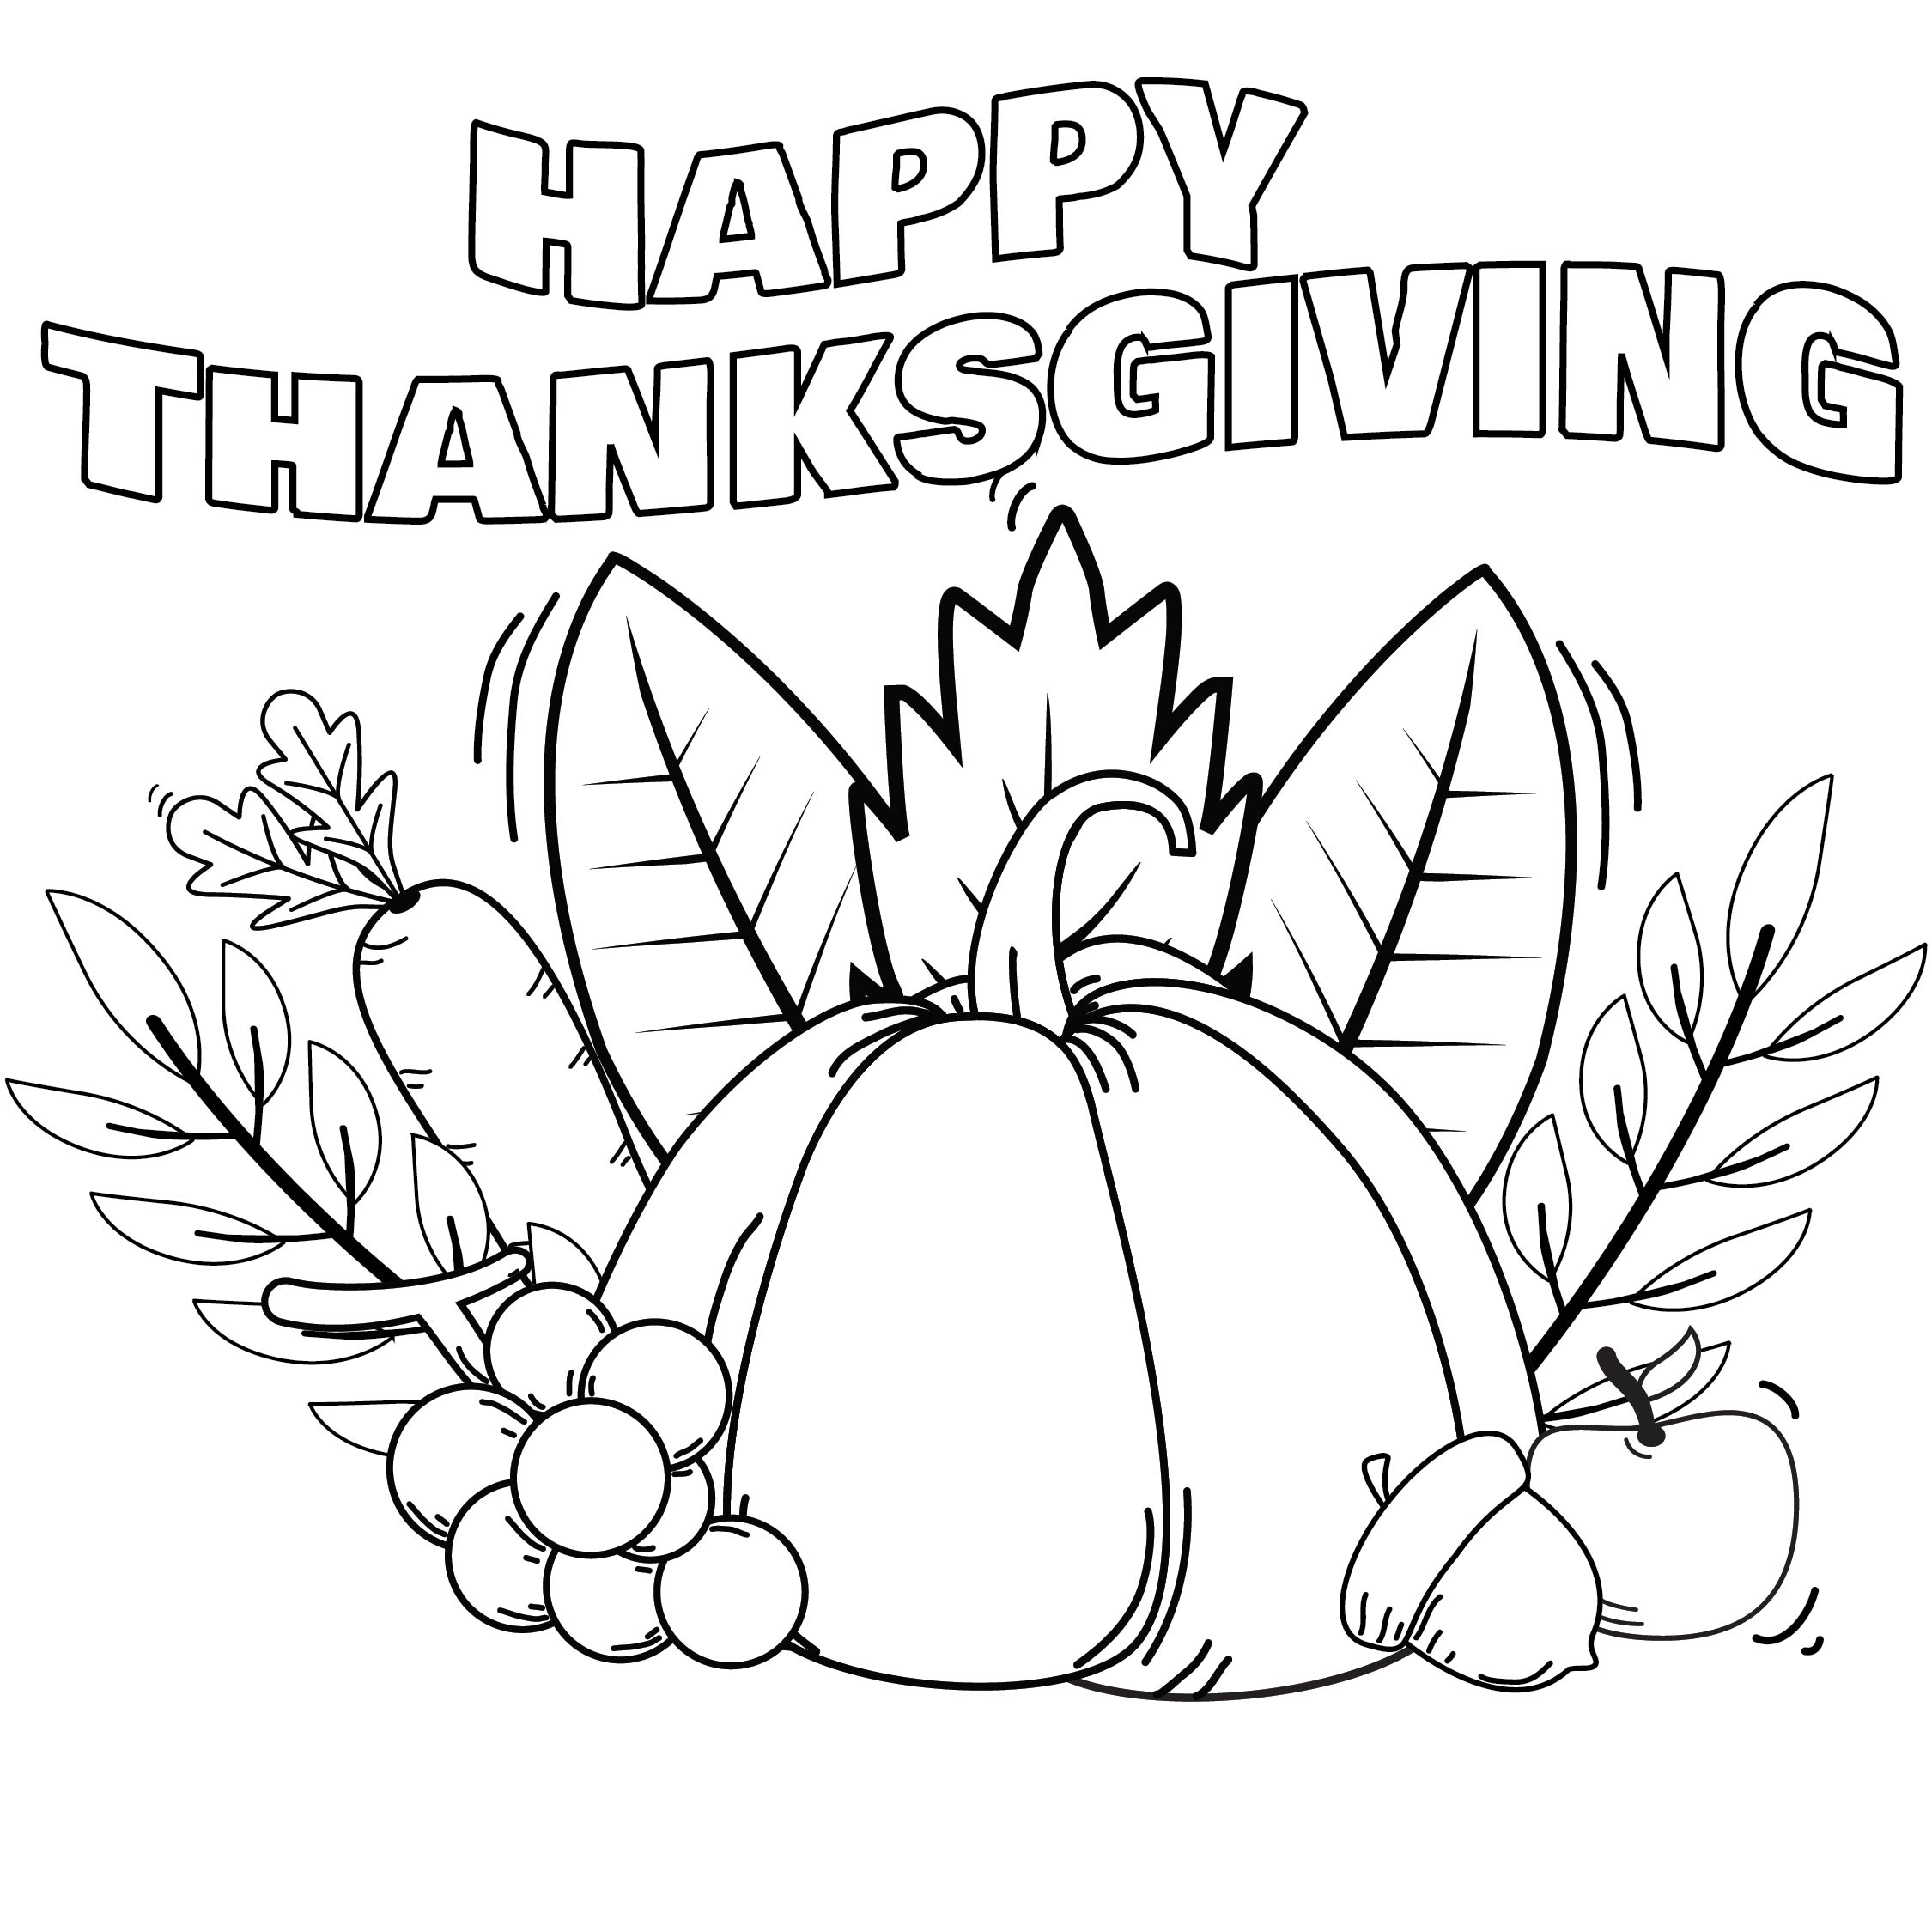 Cute happy thanksgiving coloring pages - previewmine